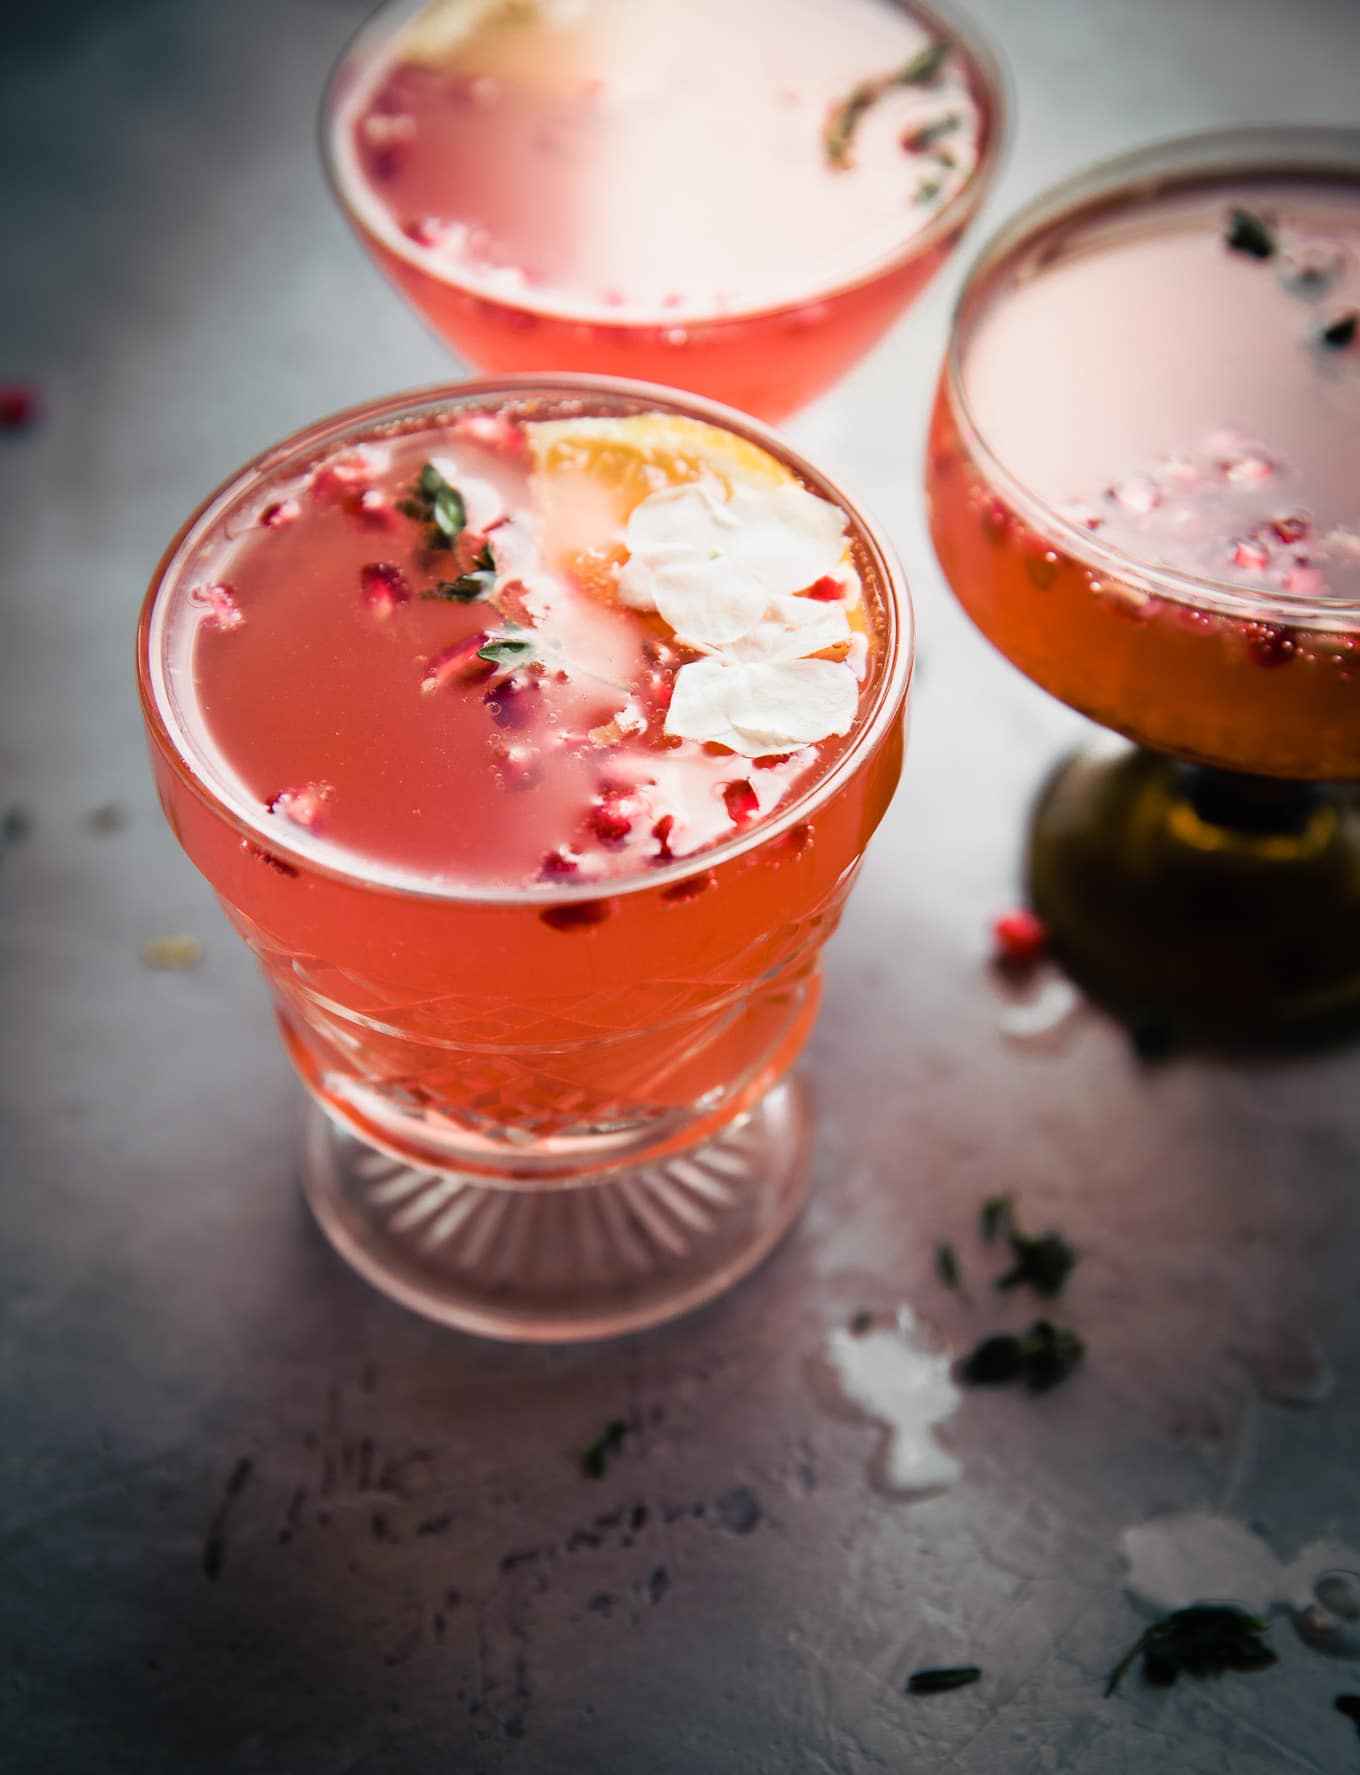 Three drinks with floating pomegranate arils, orange slices, and flowers on dark background.